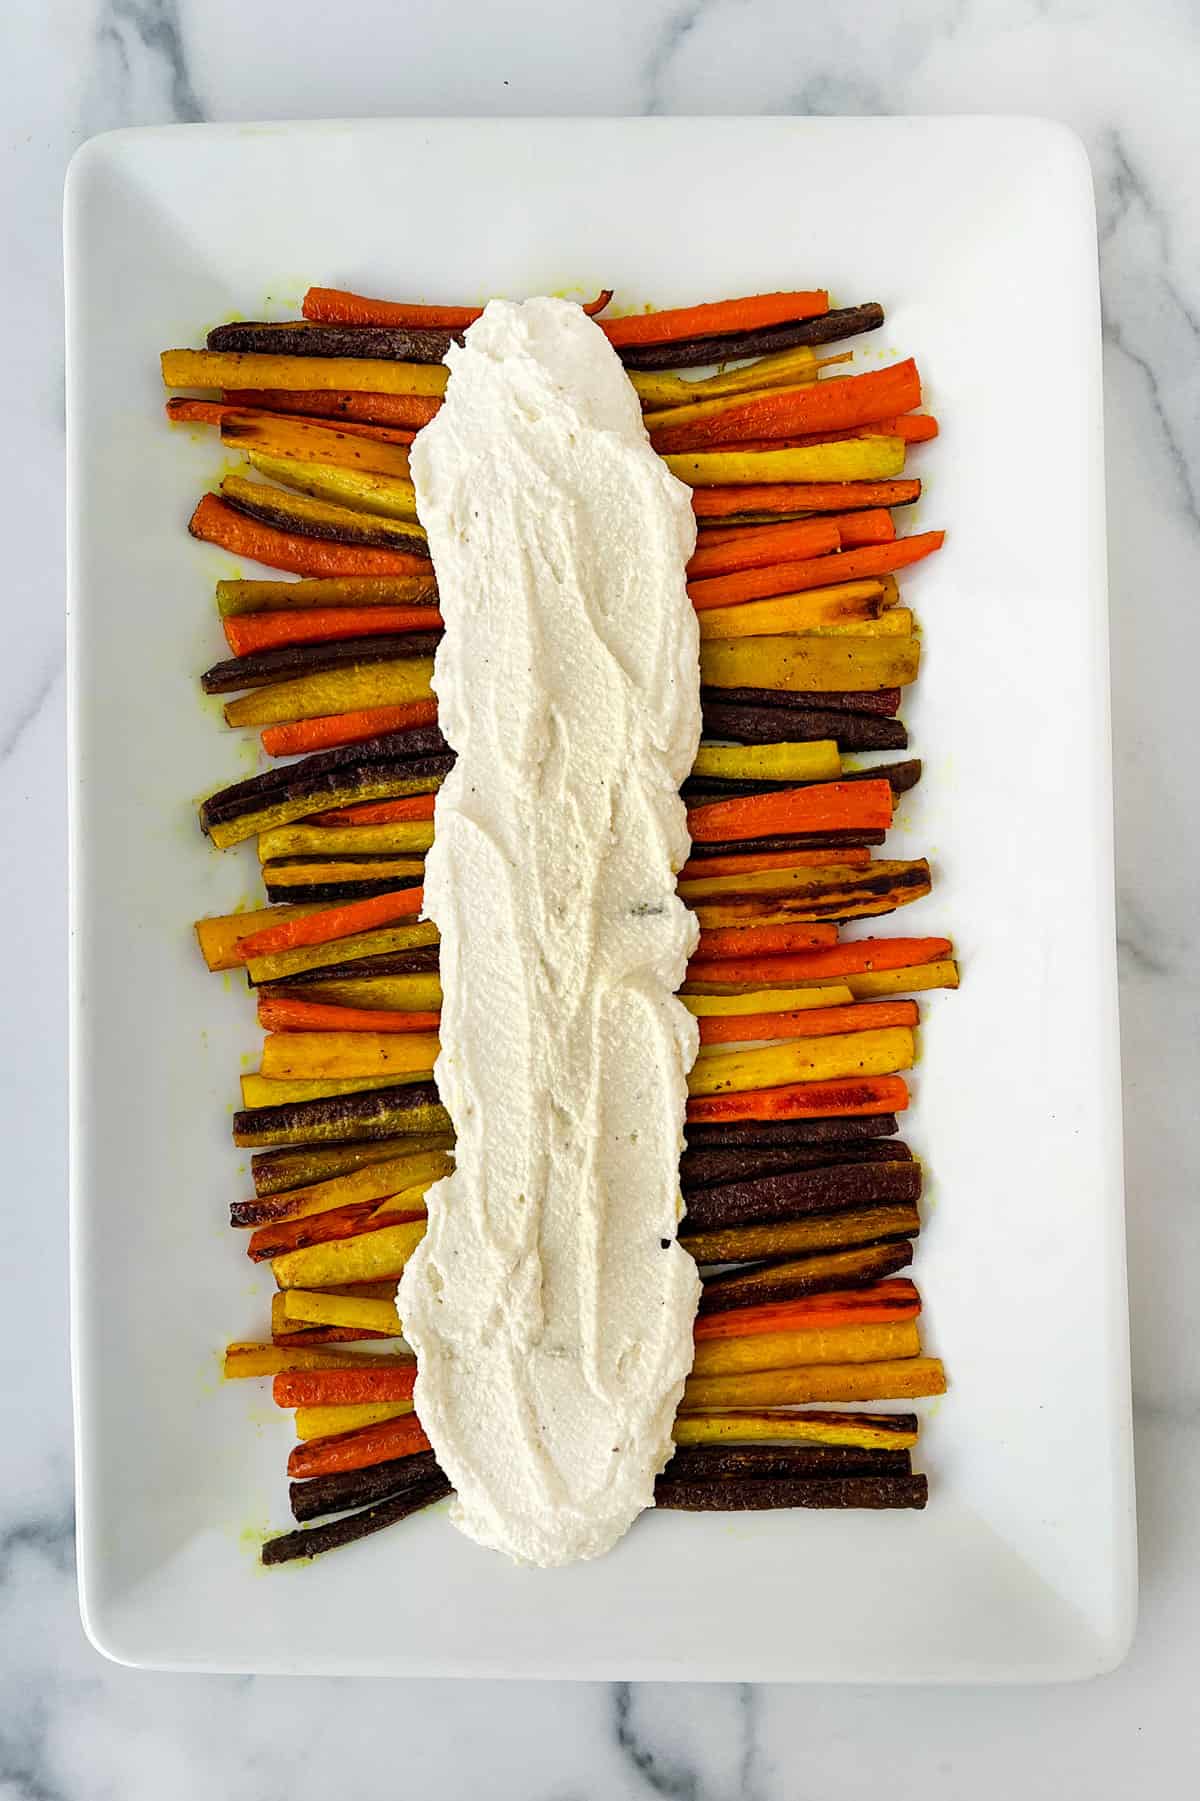 Roasted rainbow carrots sticks arranged in two rows on a rectangular platter with whipped feta spread down the middle between the rows.